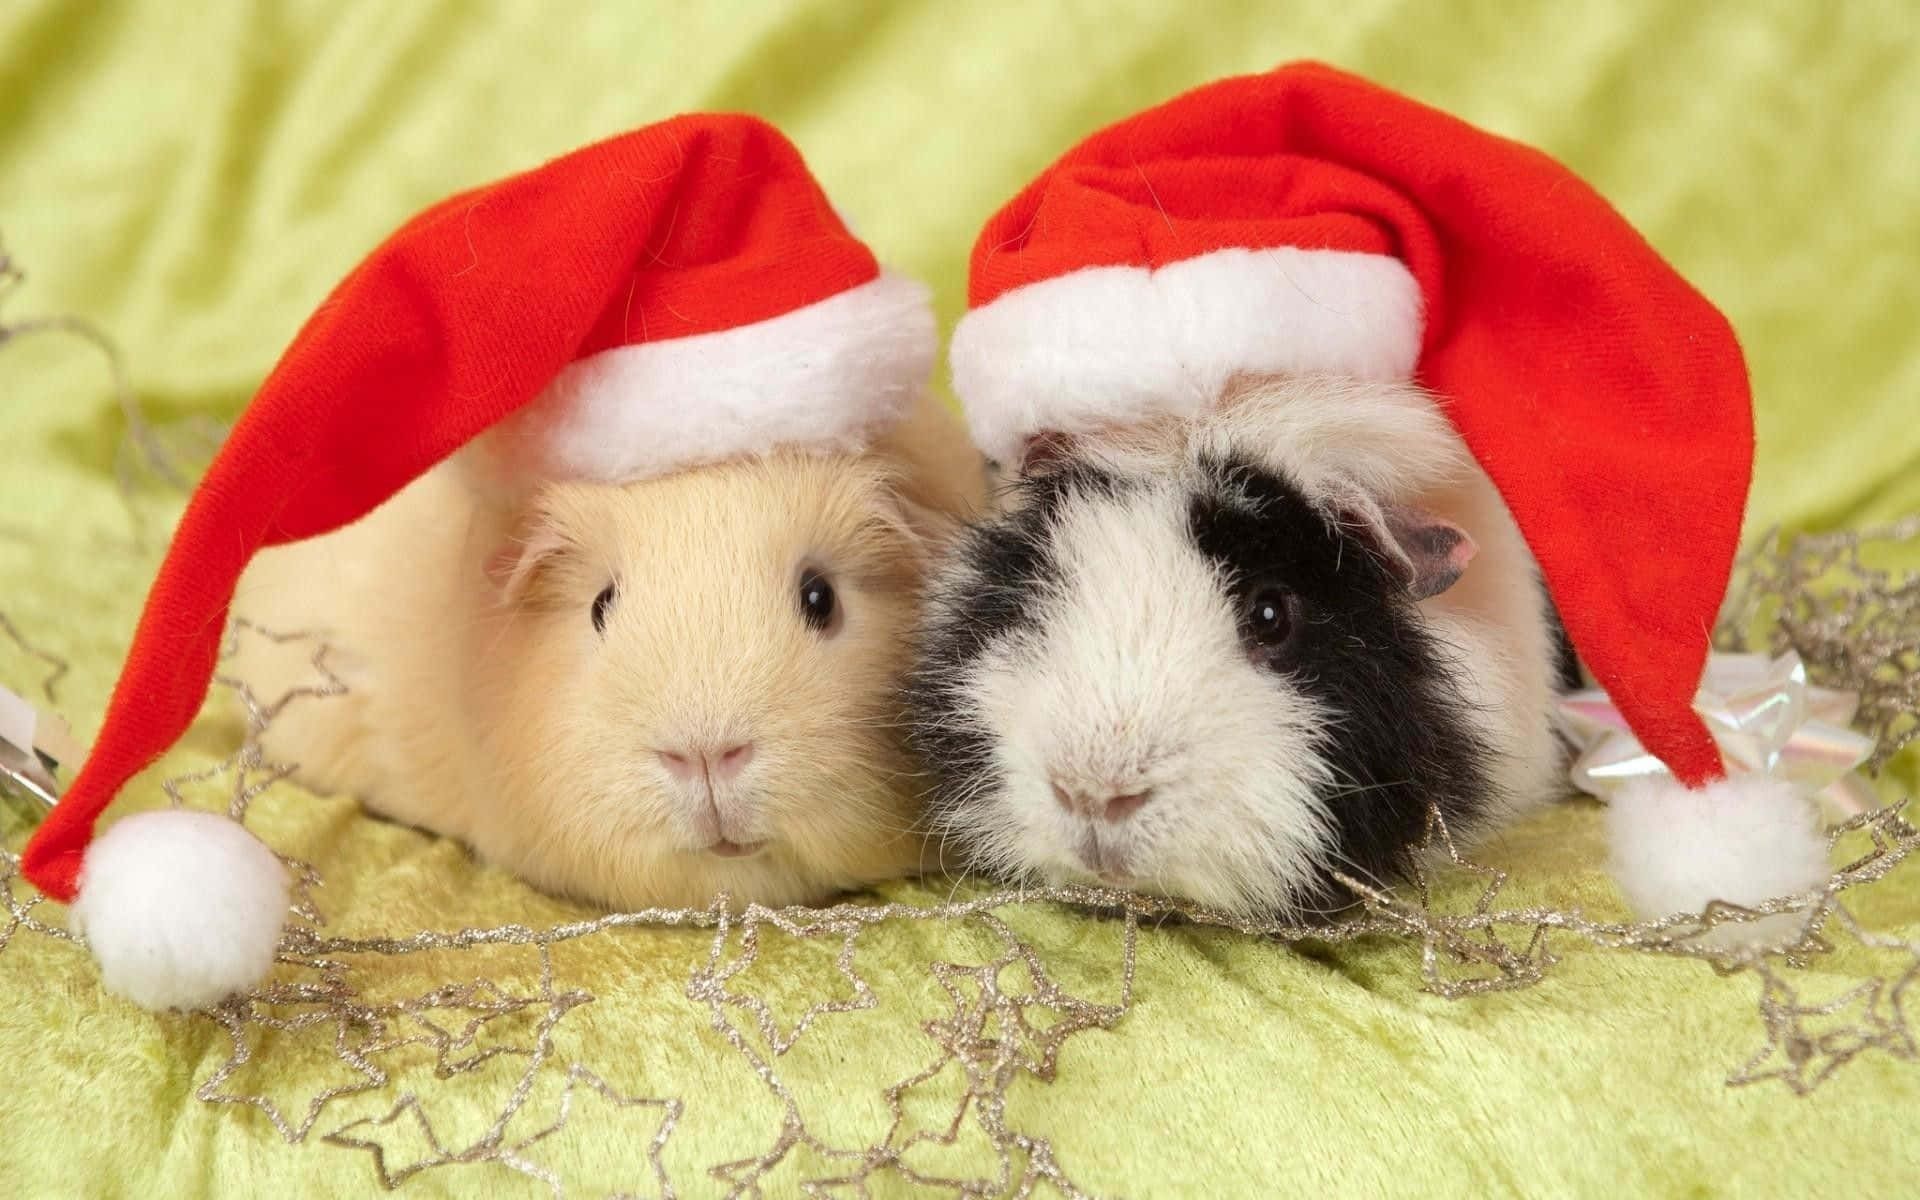 Cute Guinea Pig Wearing Red Santa Hats Pictures